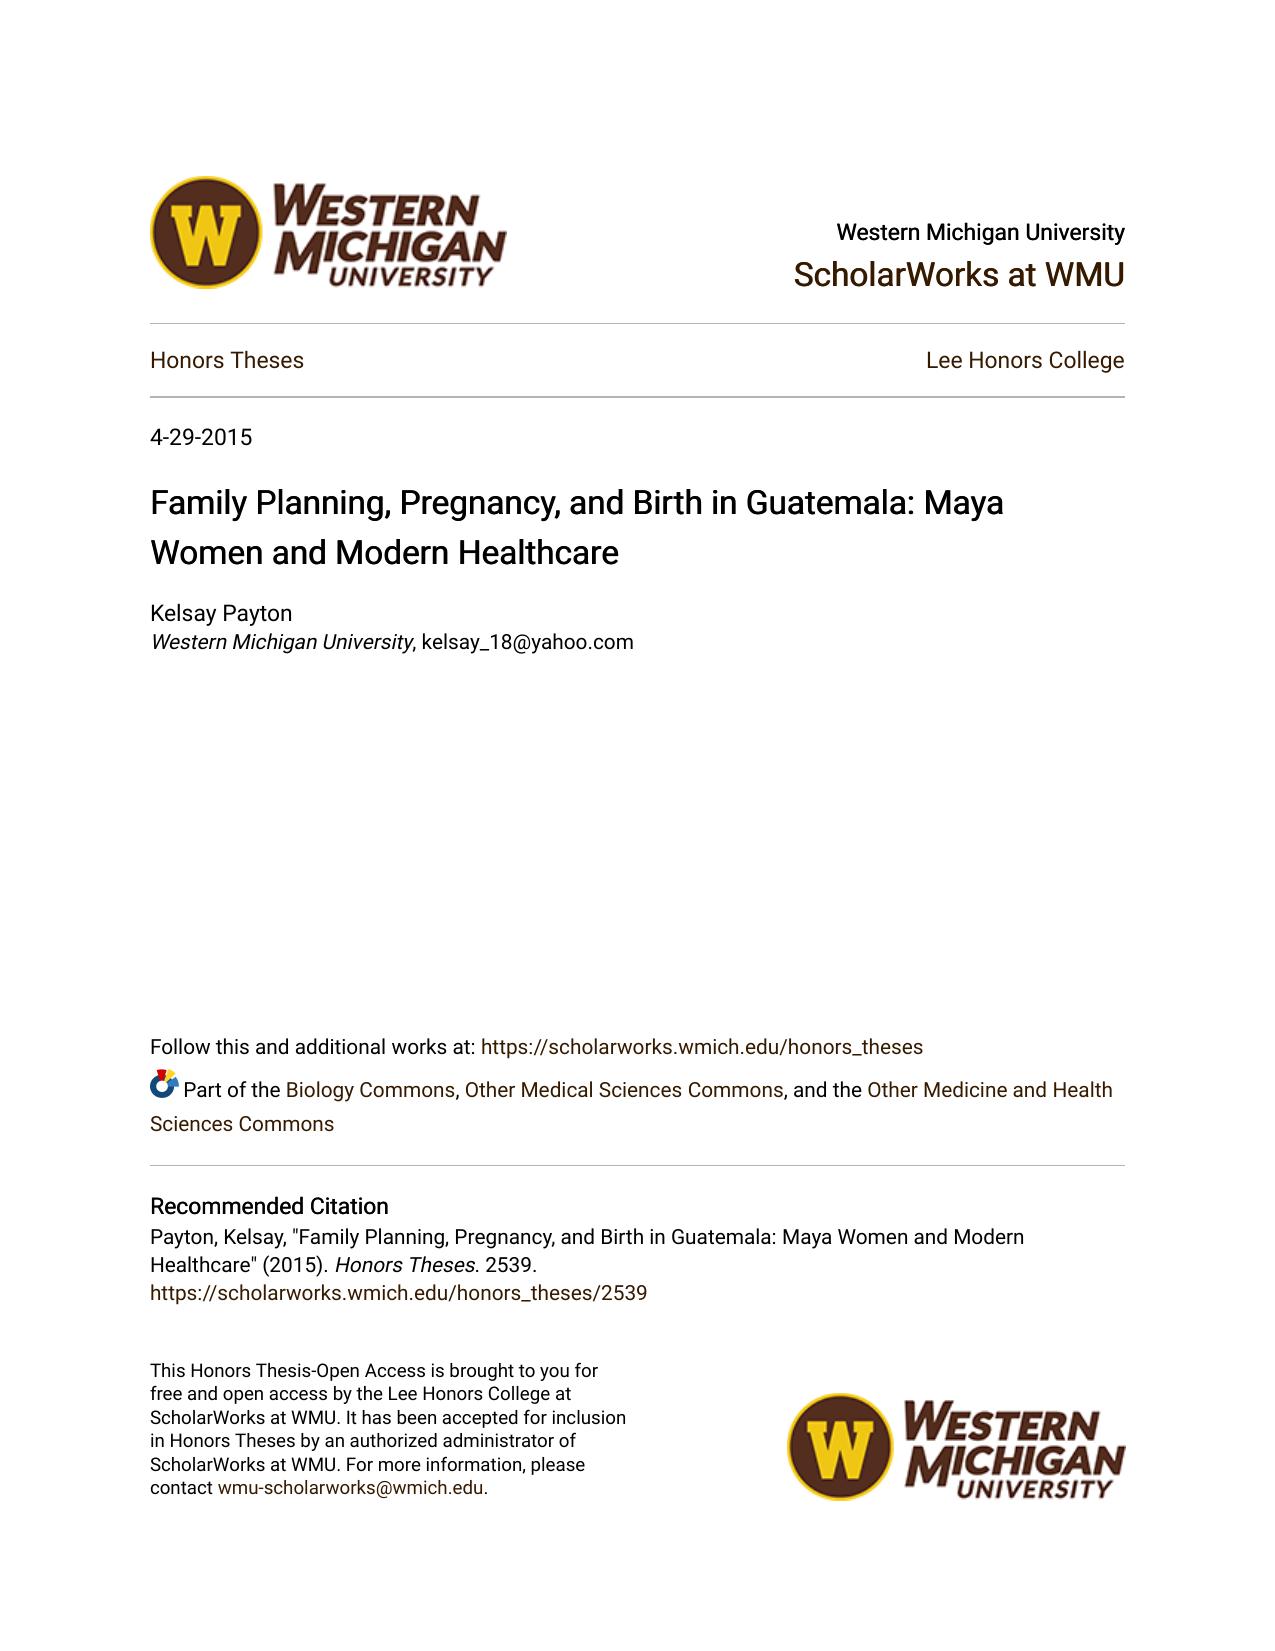 Family Planning, Pregnancy, and Birth in Guatemala: Maya Women and Modern Healthcare